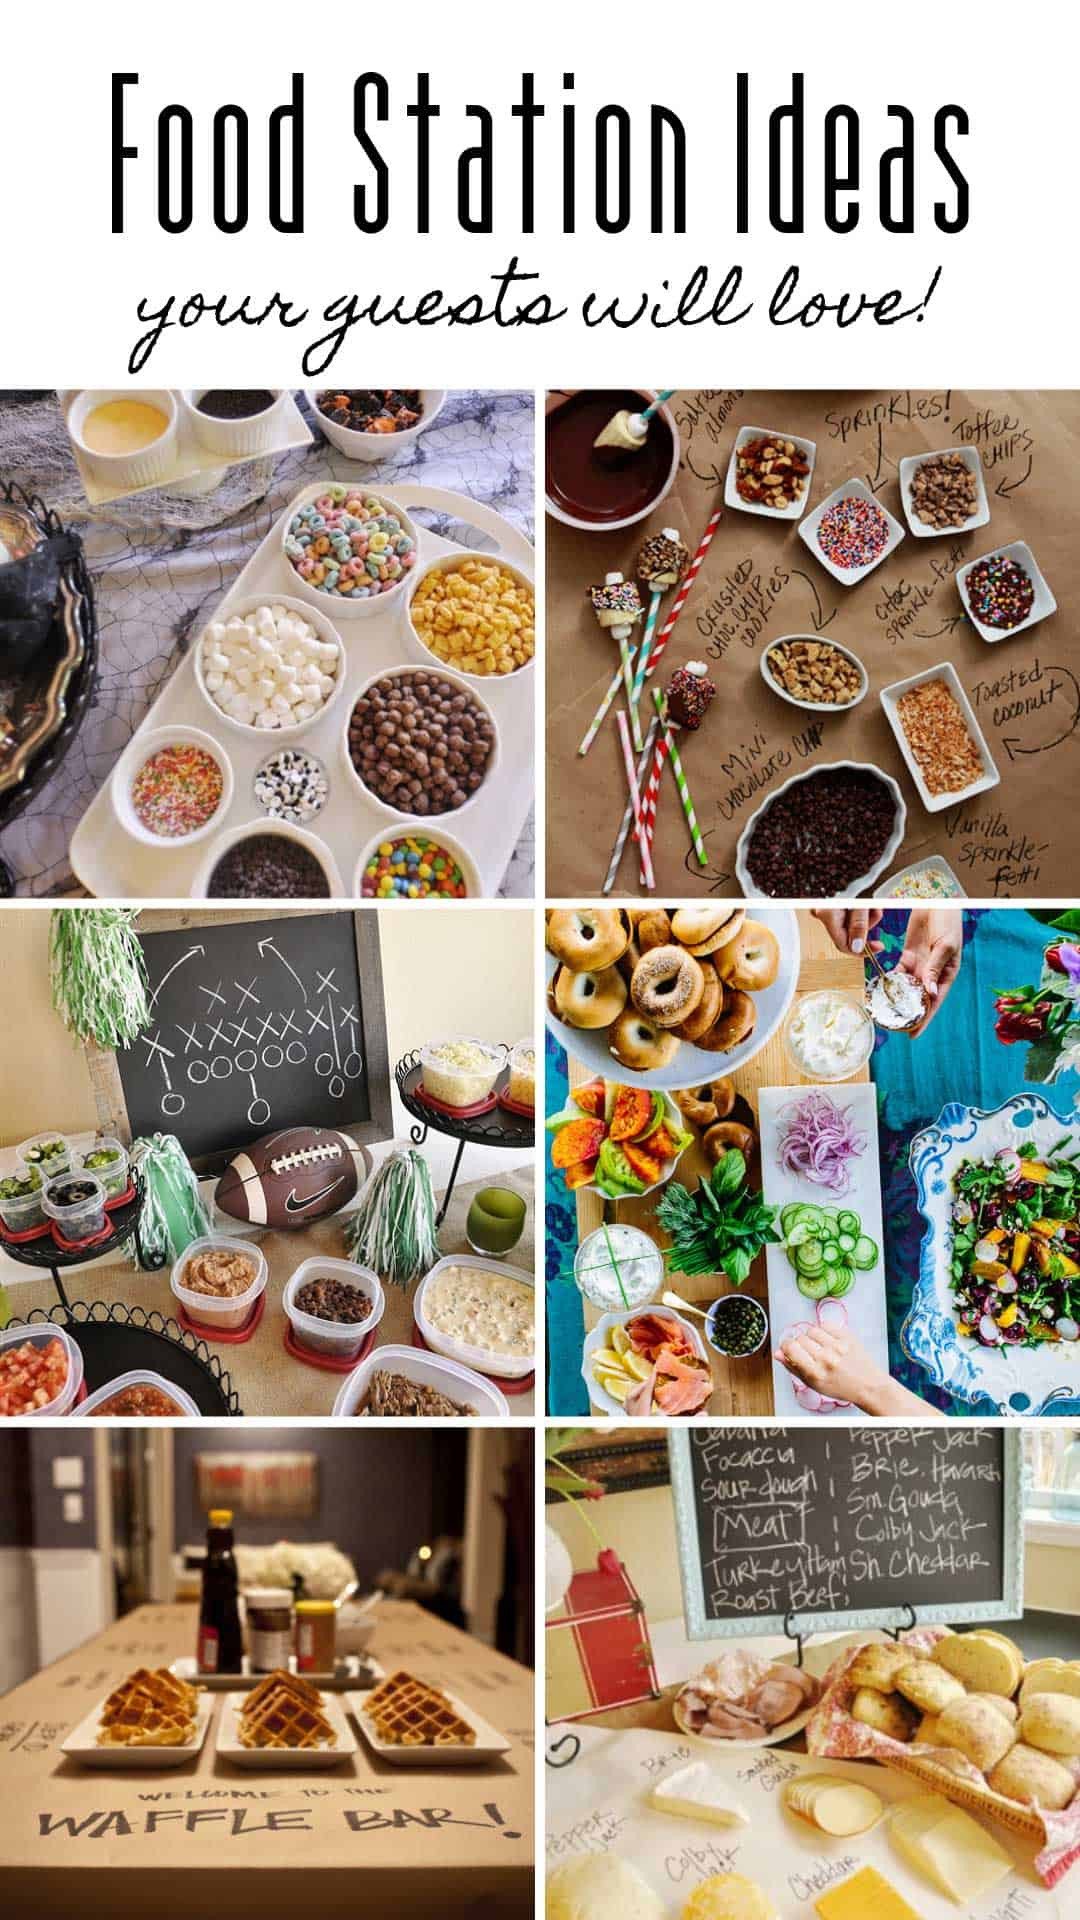 Party Food Bar Ideas
 26 Build Your Own Party Food Bar Ideas Your Guests Will Go